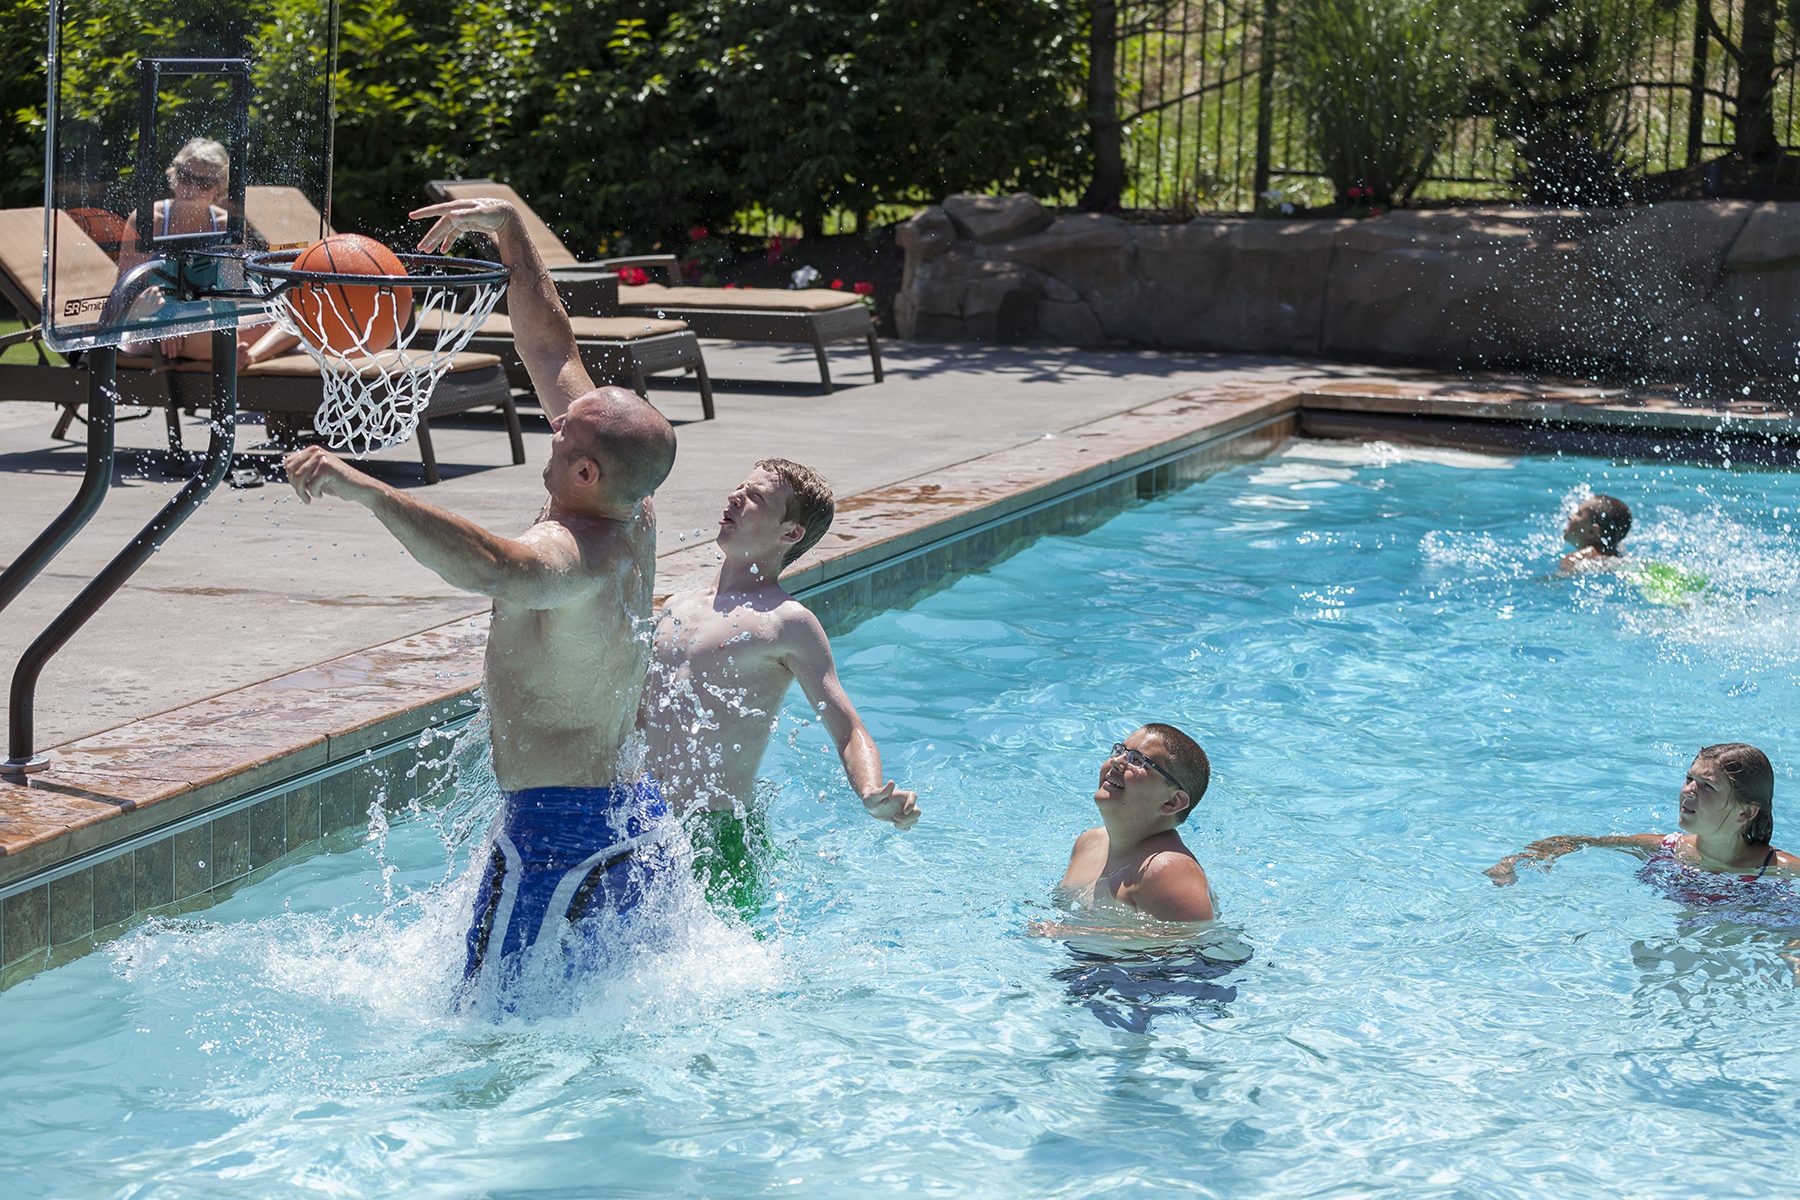 Turn your pool into a slam dunk!